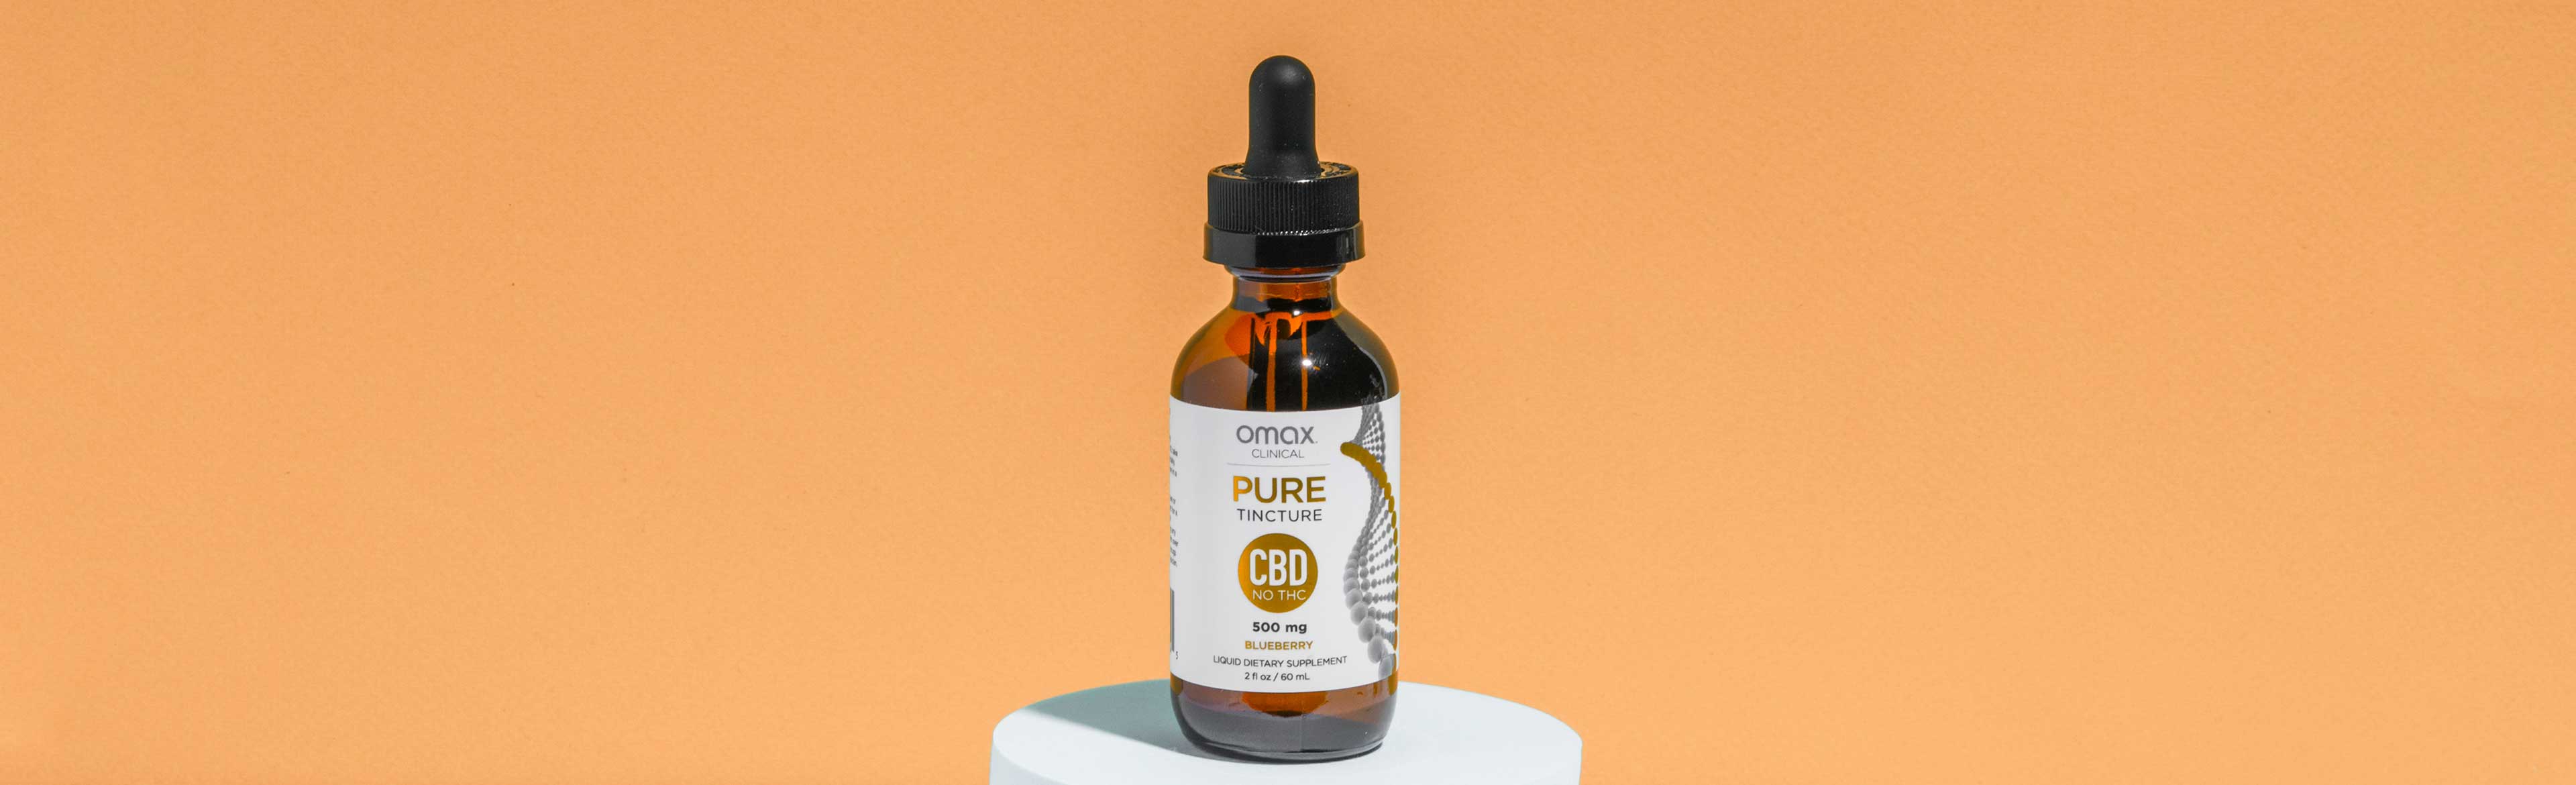 Healing with the power of CBD.